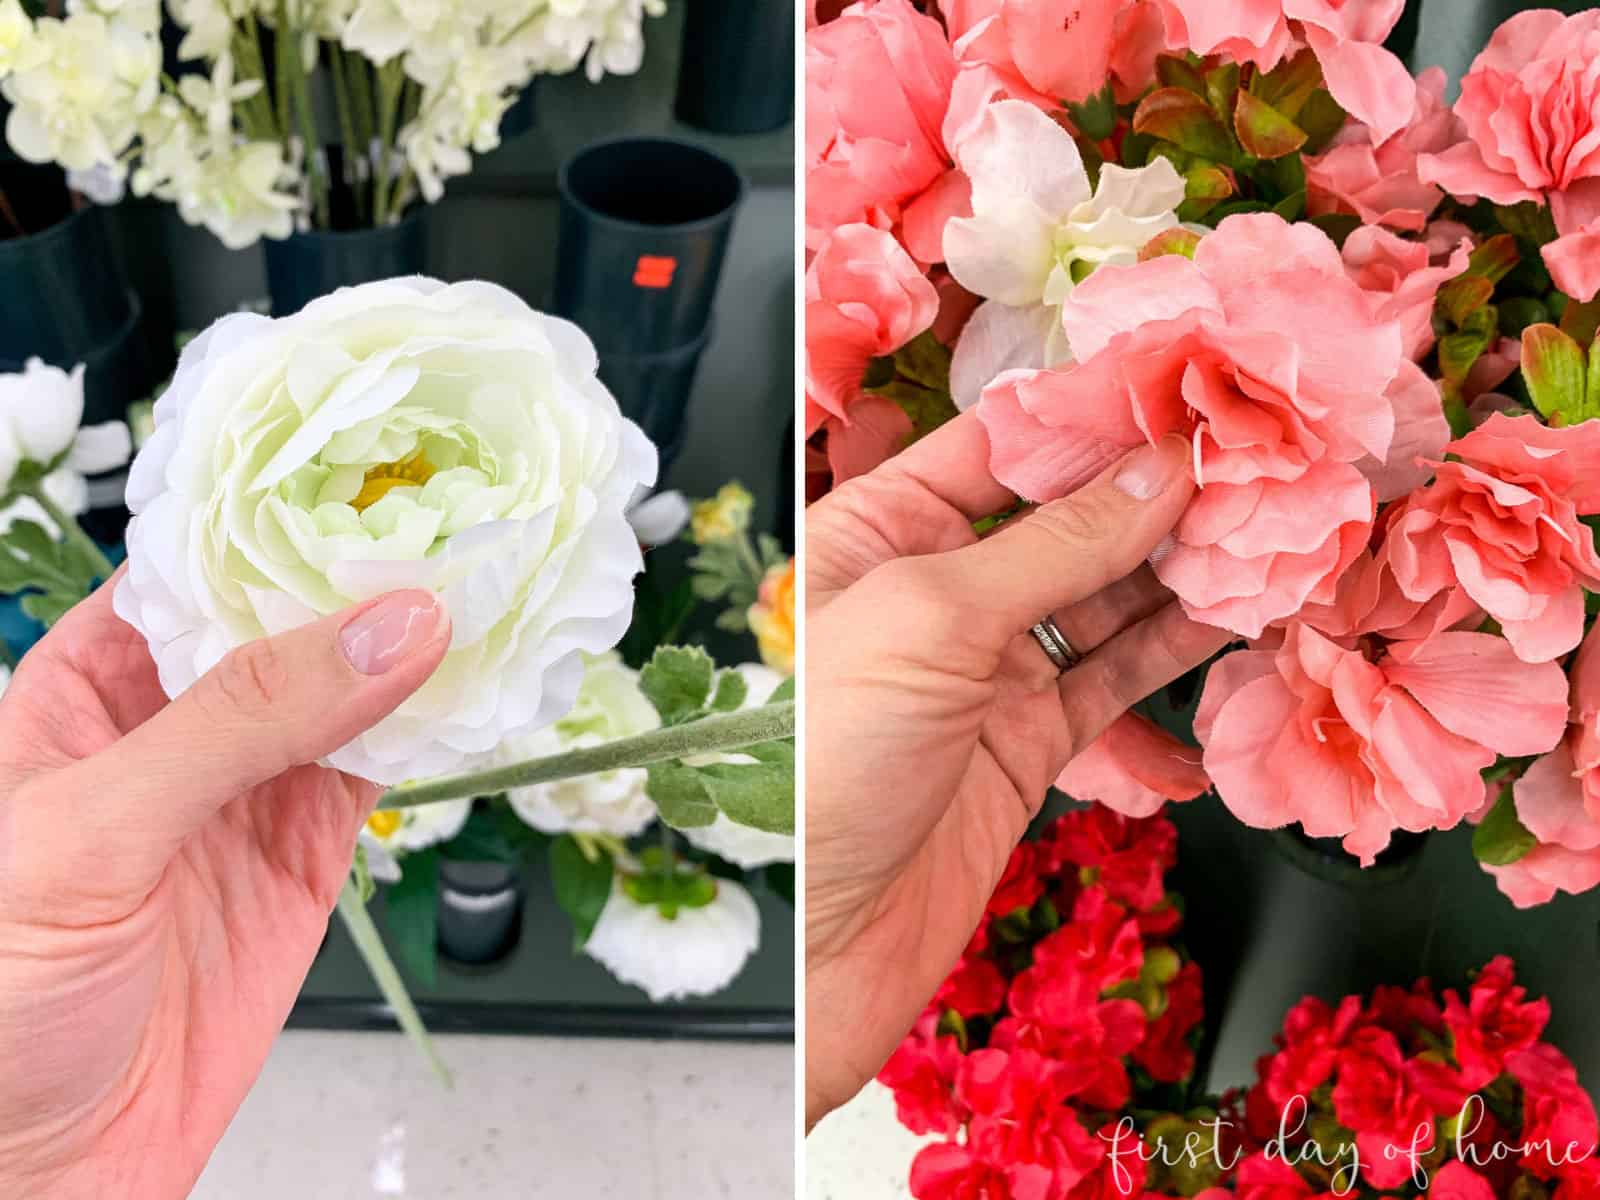 Examples of best artificial flowers to buy for outdoor spring wreath (ranunculus and other paper-like petals)